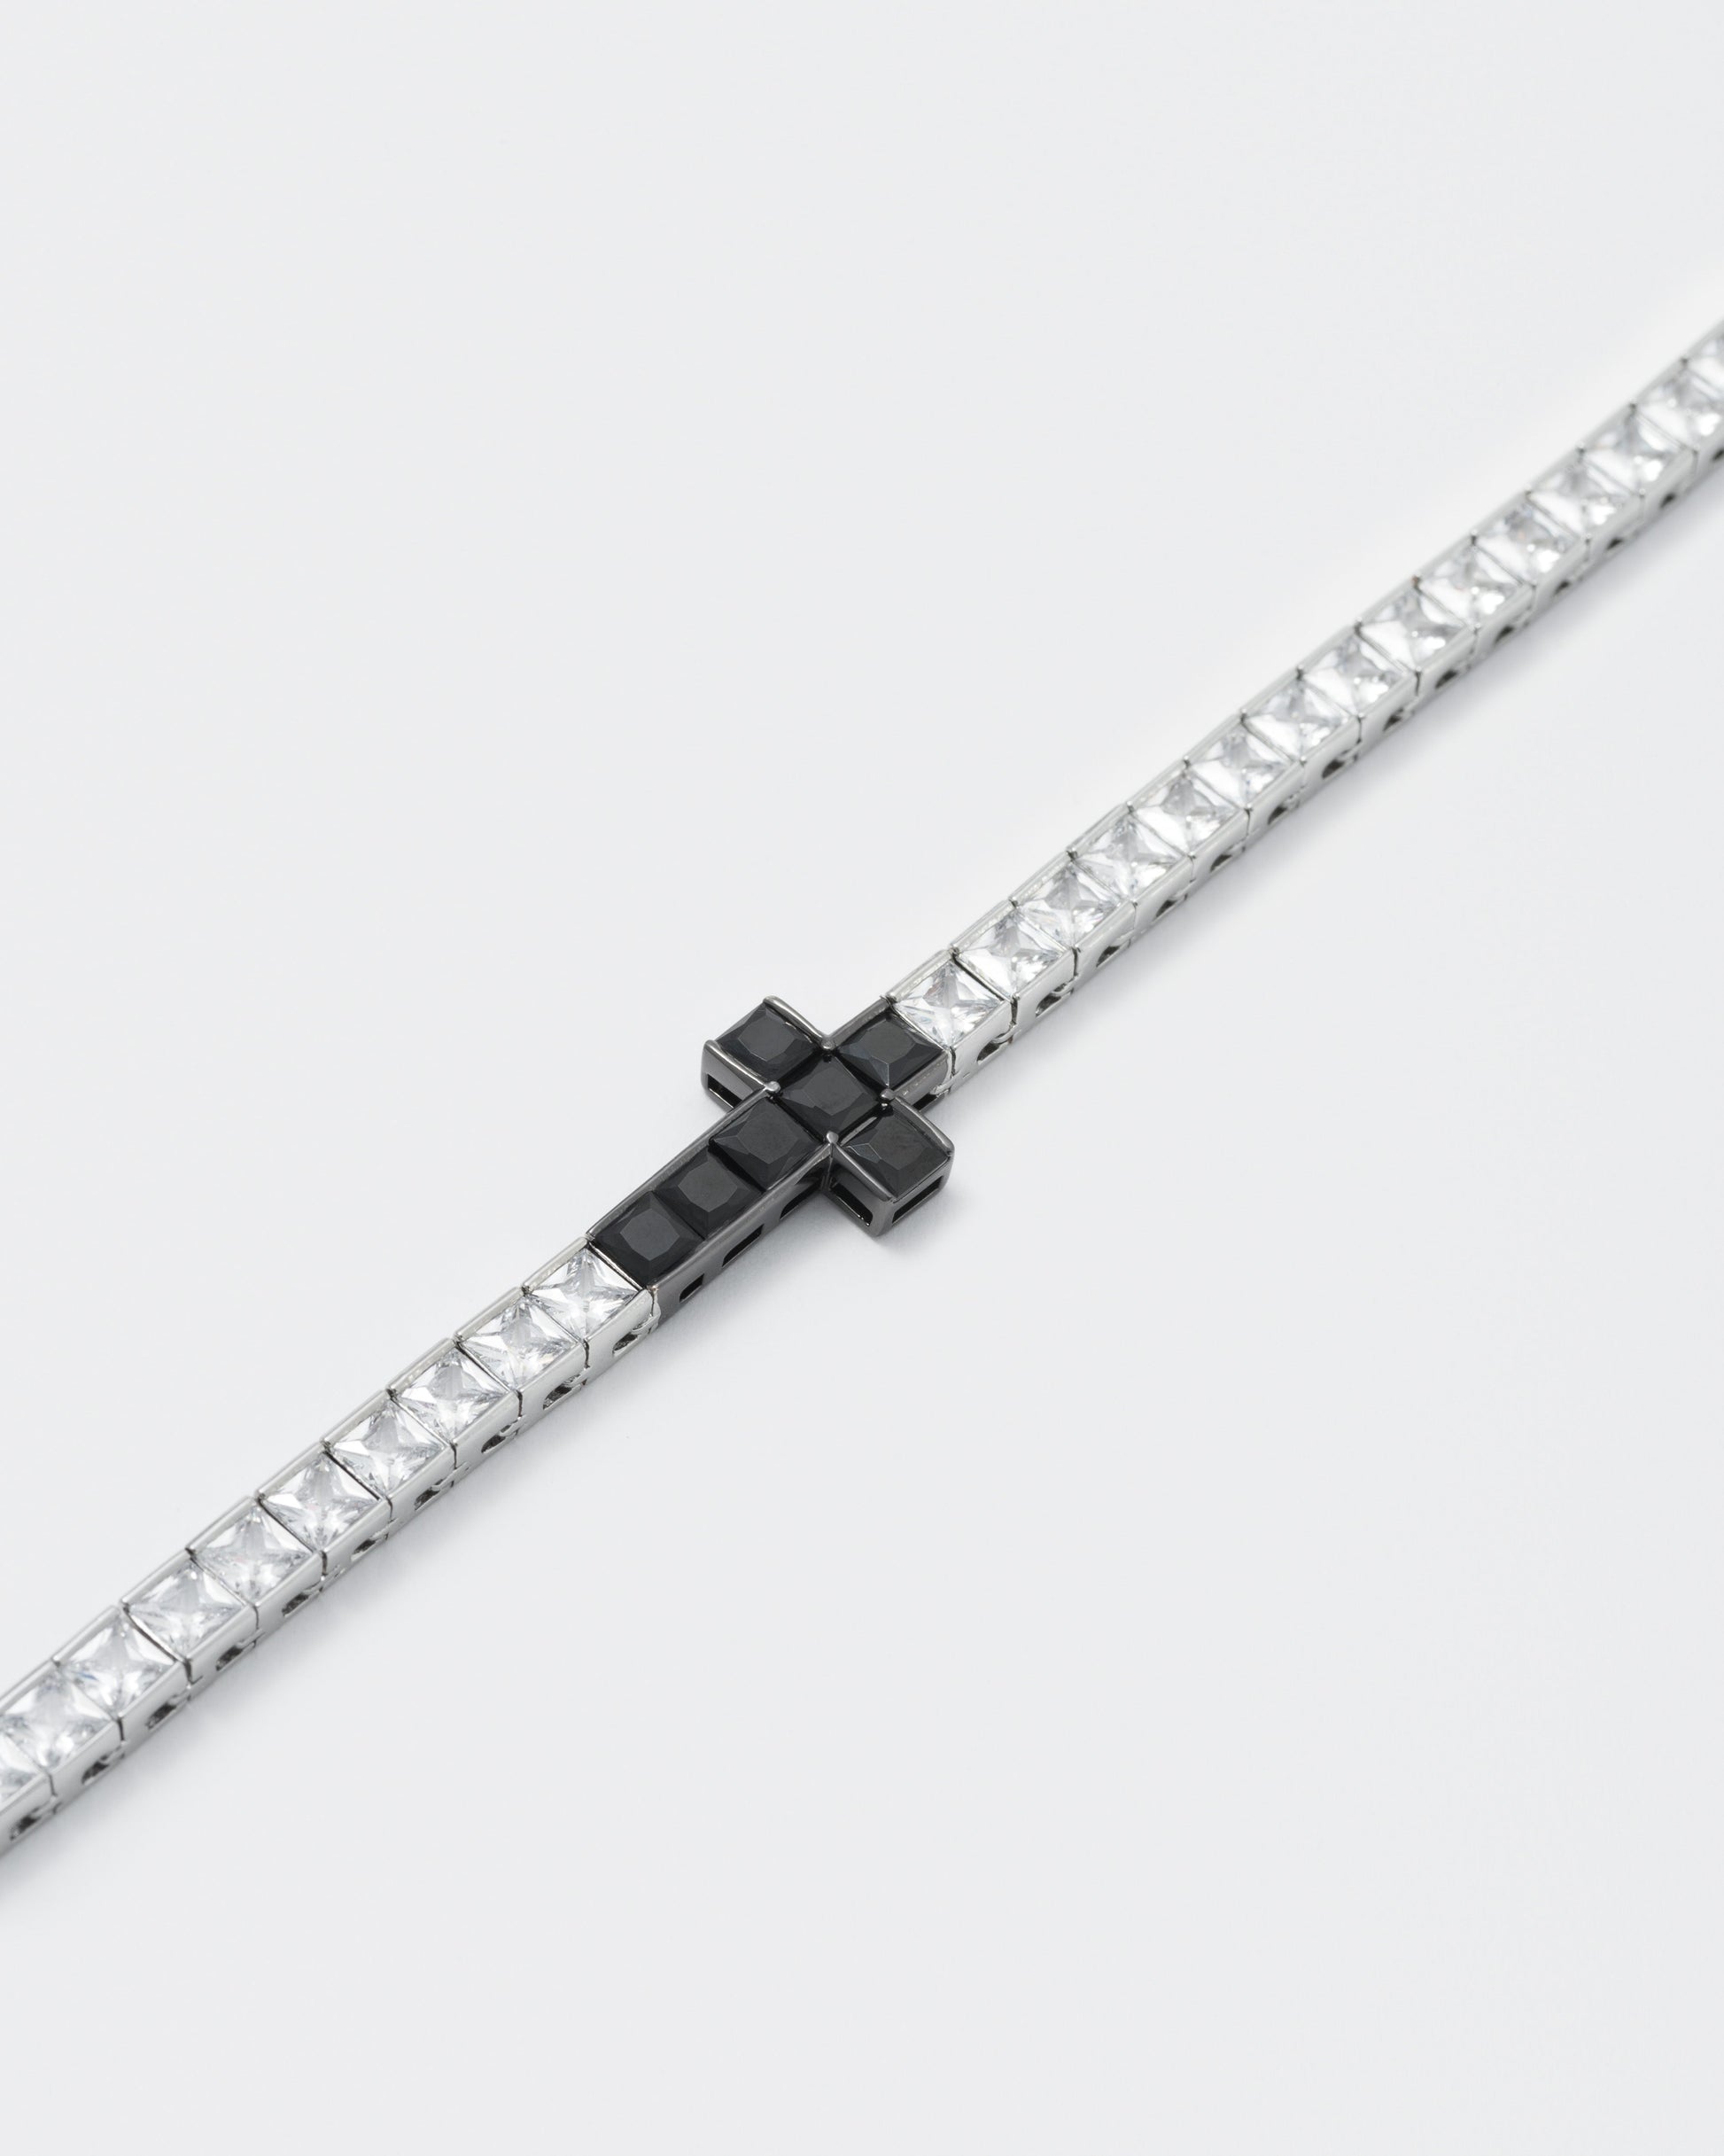 detail of 18k white gold and black coated tennis chain necklace with contrasting cross element and hand-set princess-cut stones in white and black